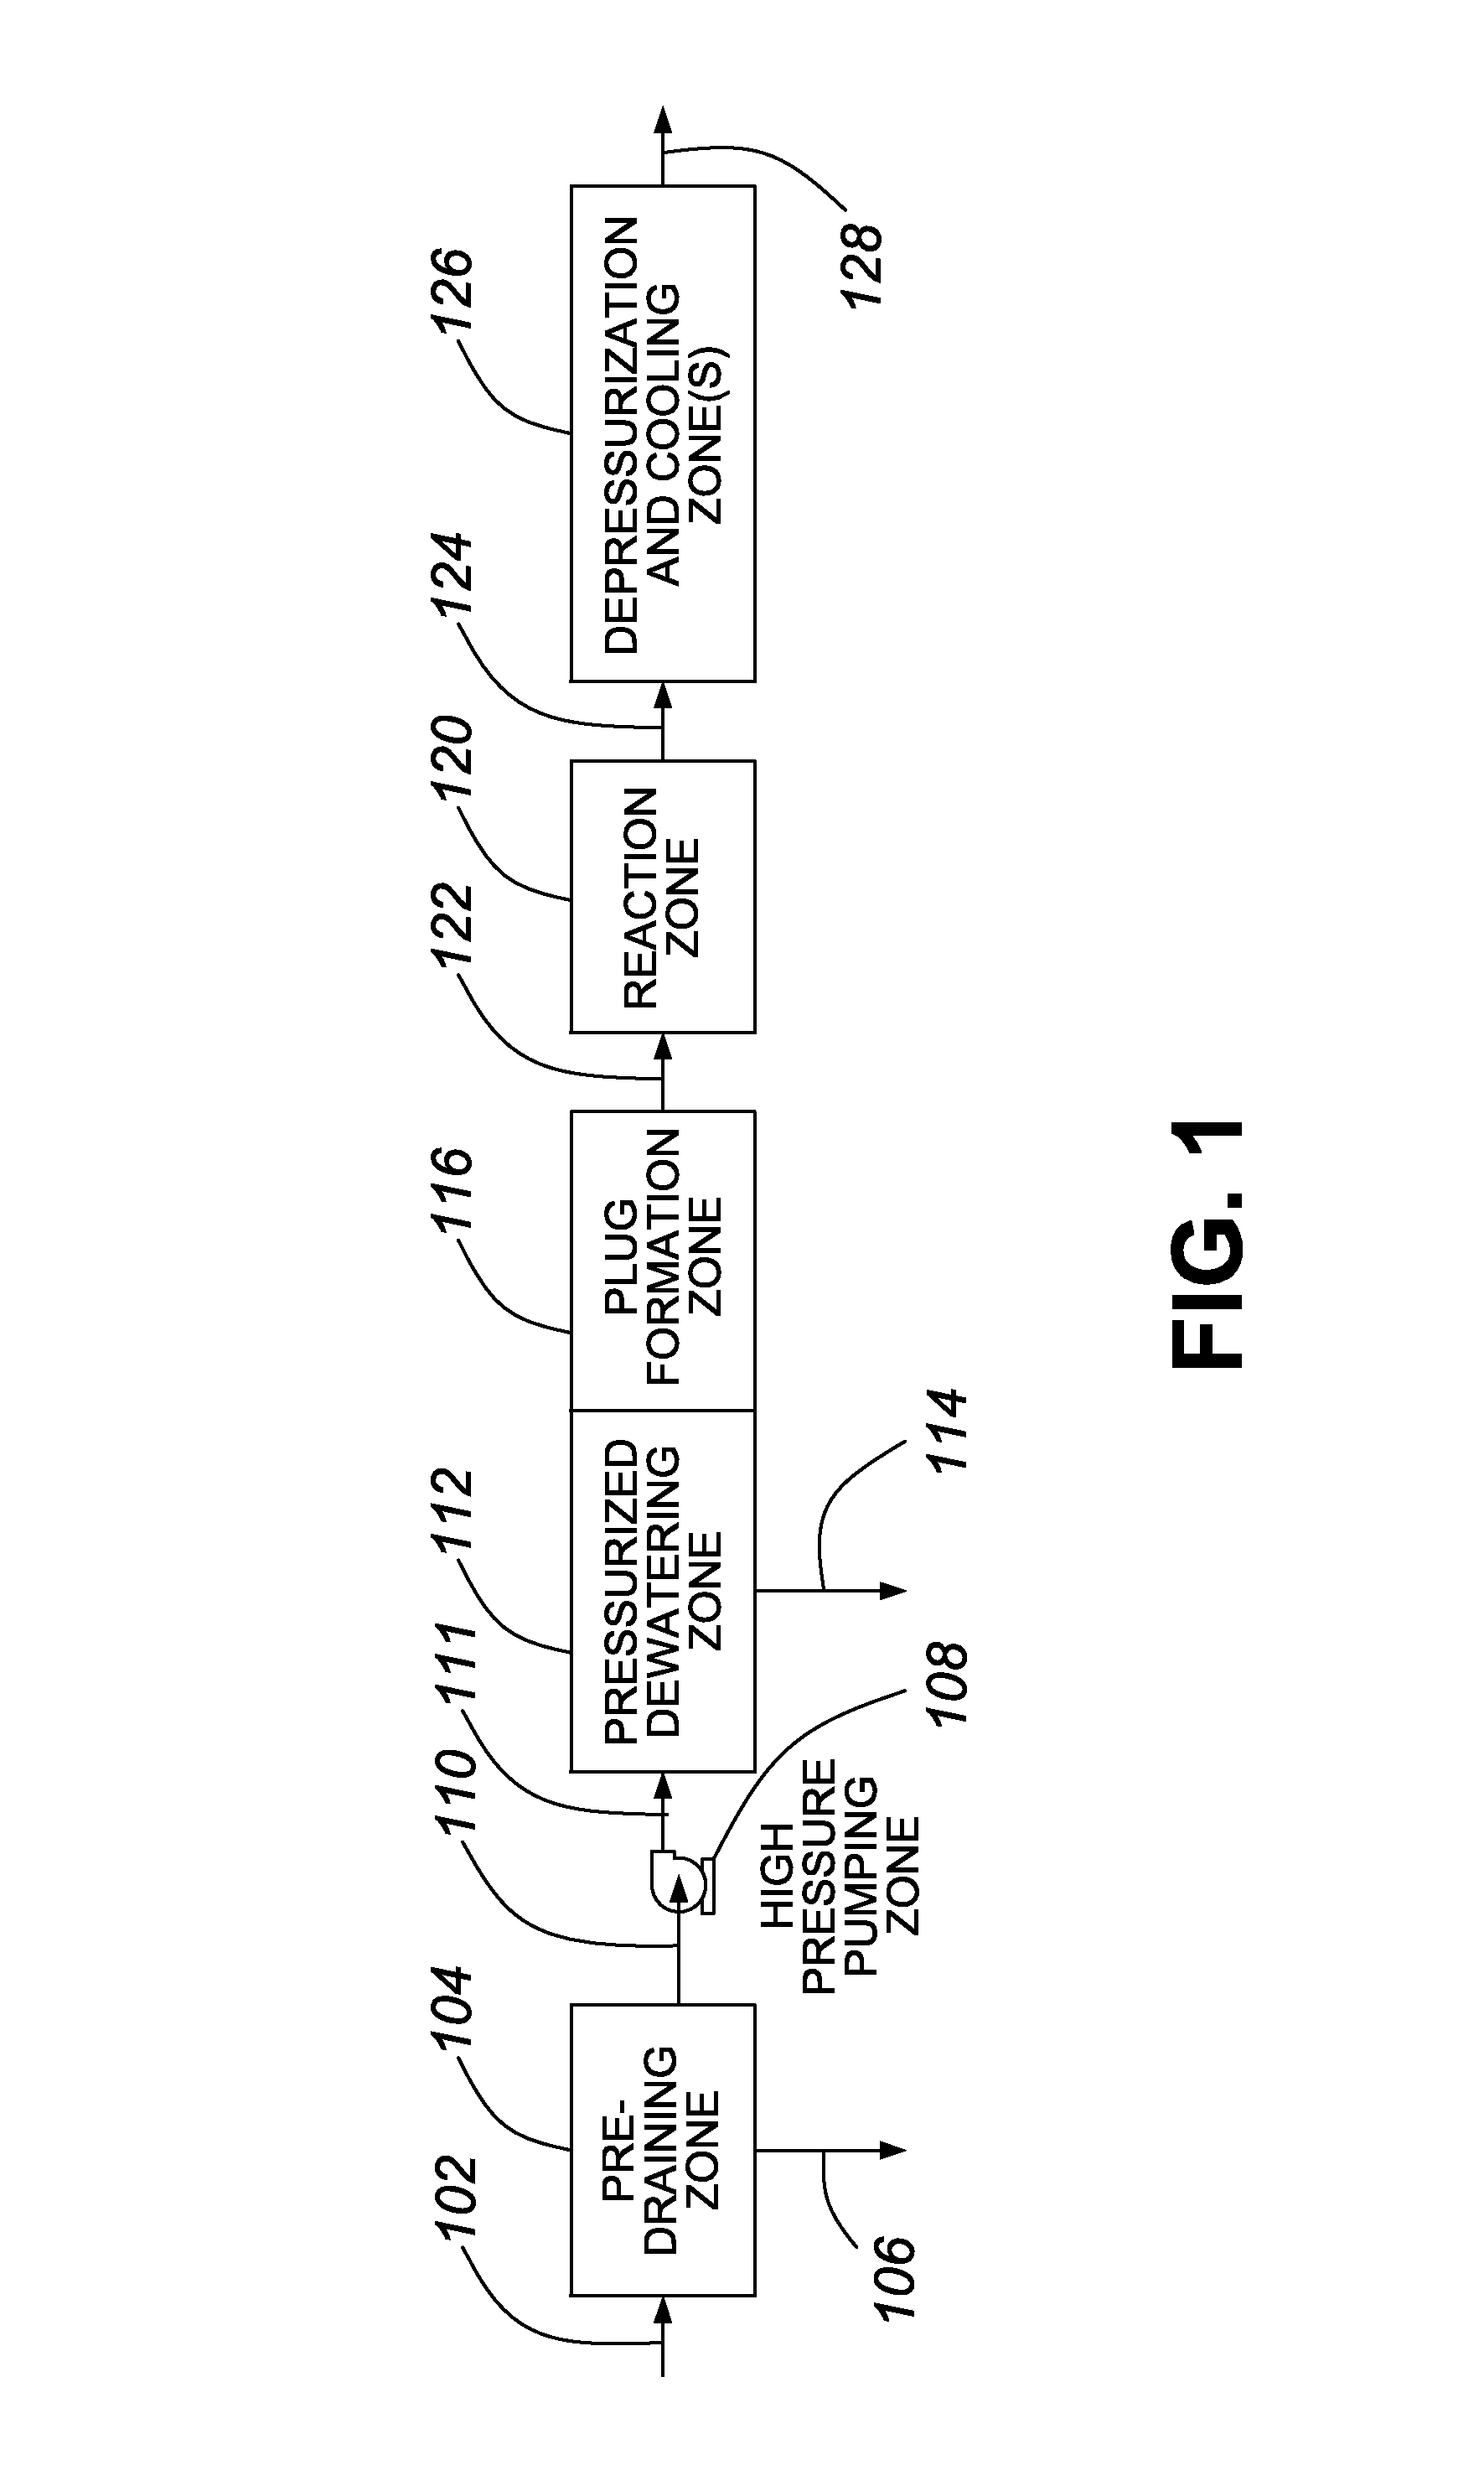 Method for low water hydrolysis or pretreatment of polysaccharides in a lignocellulosic feedstock